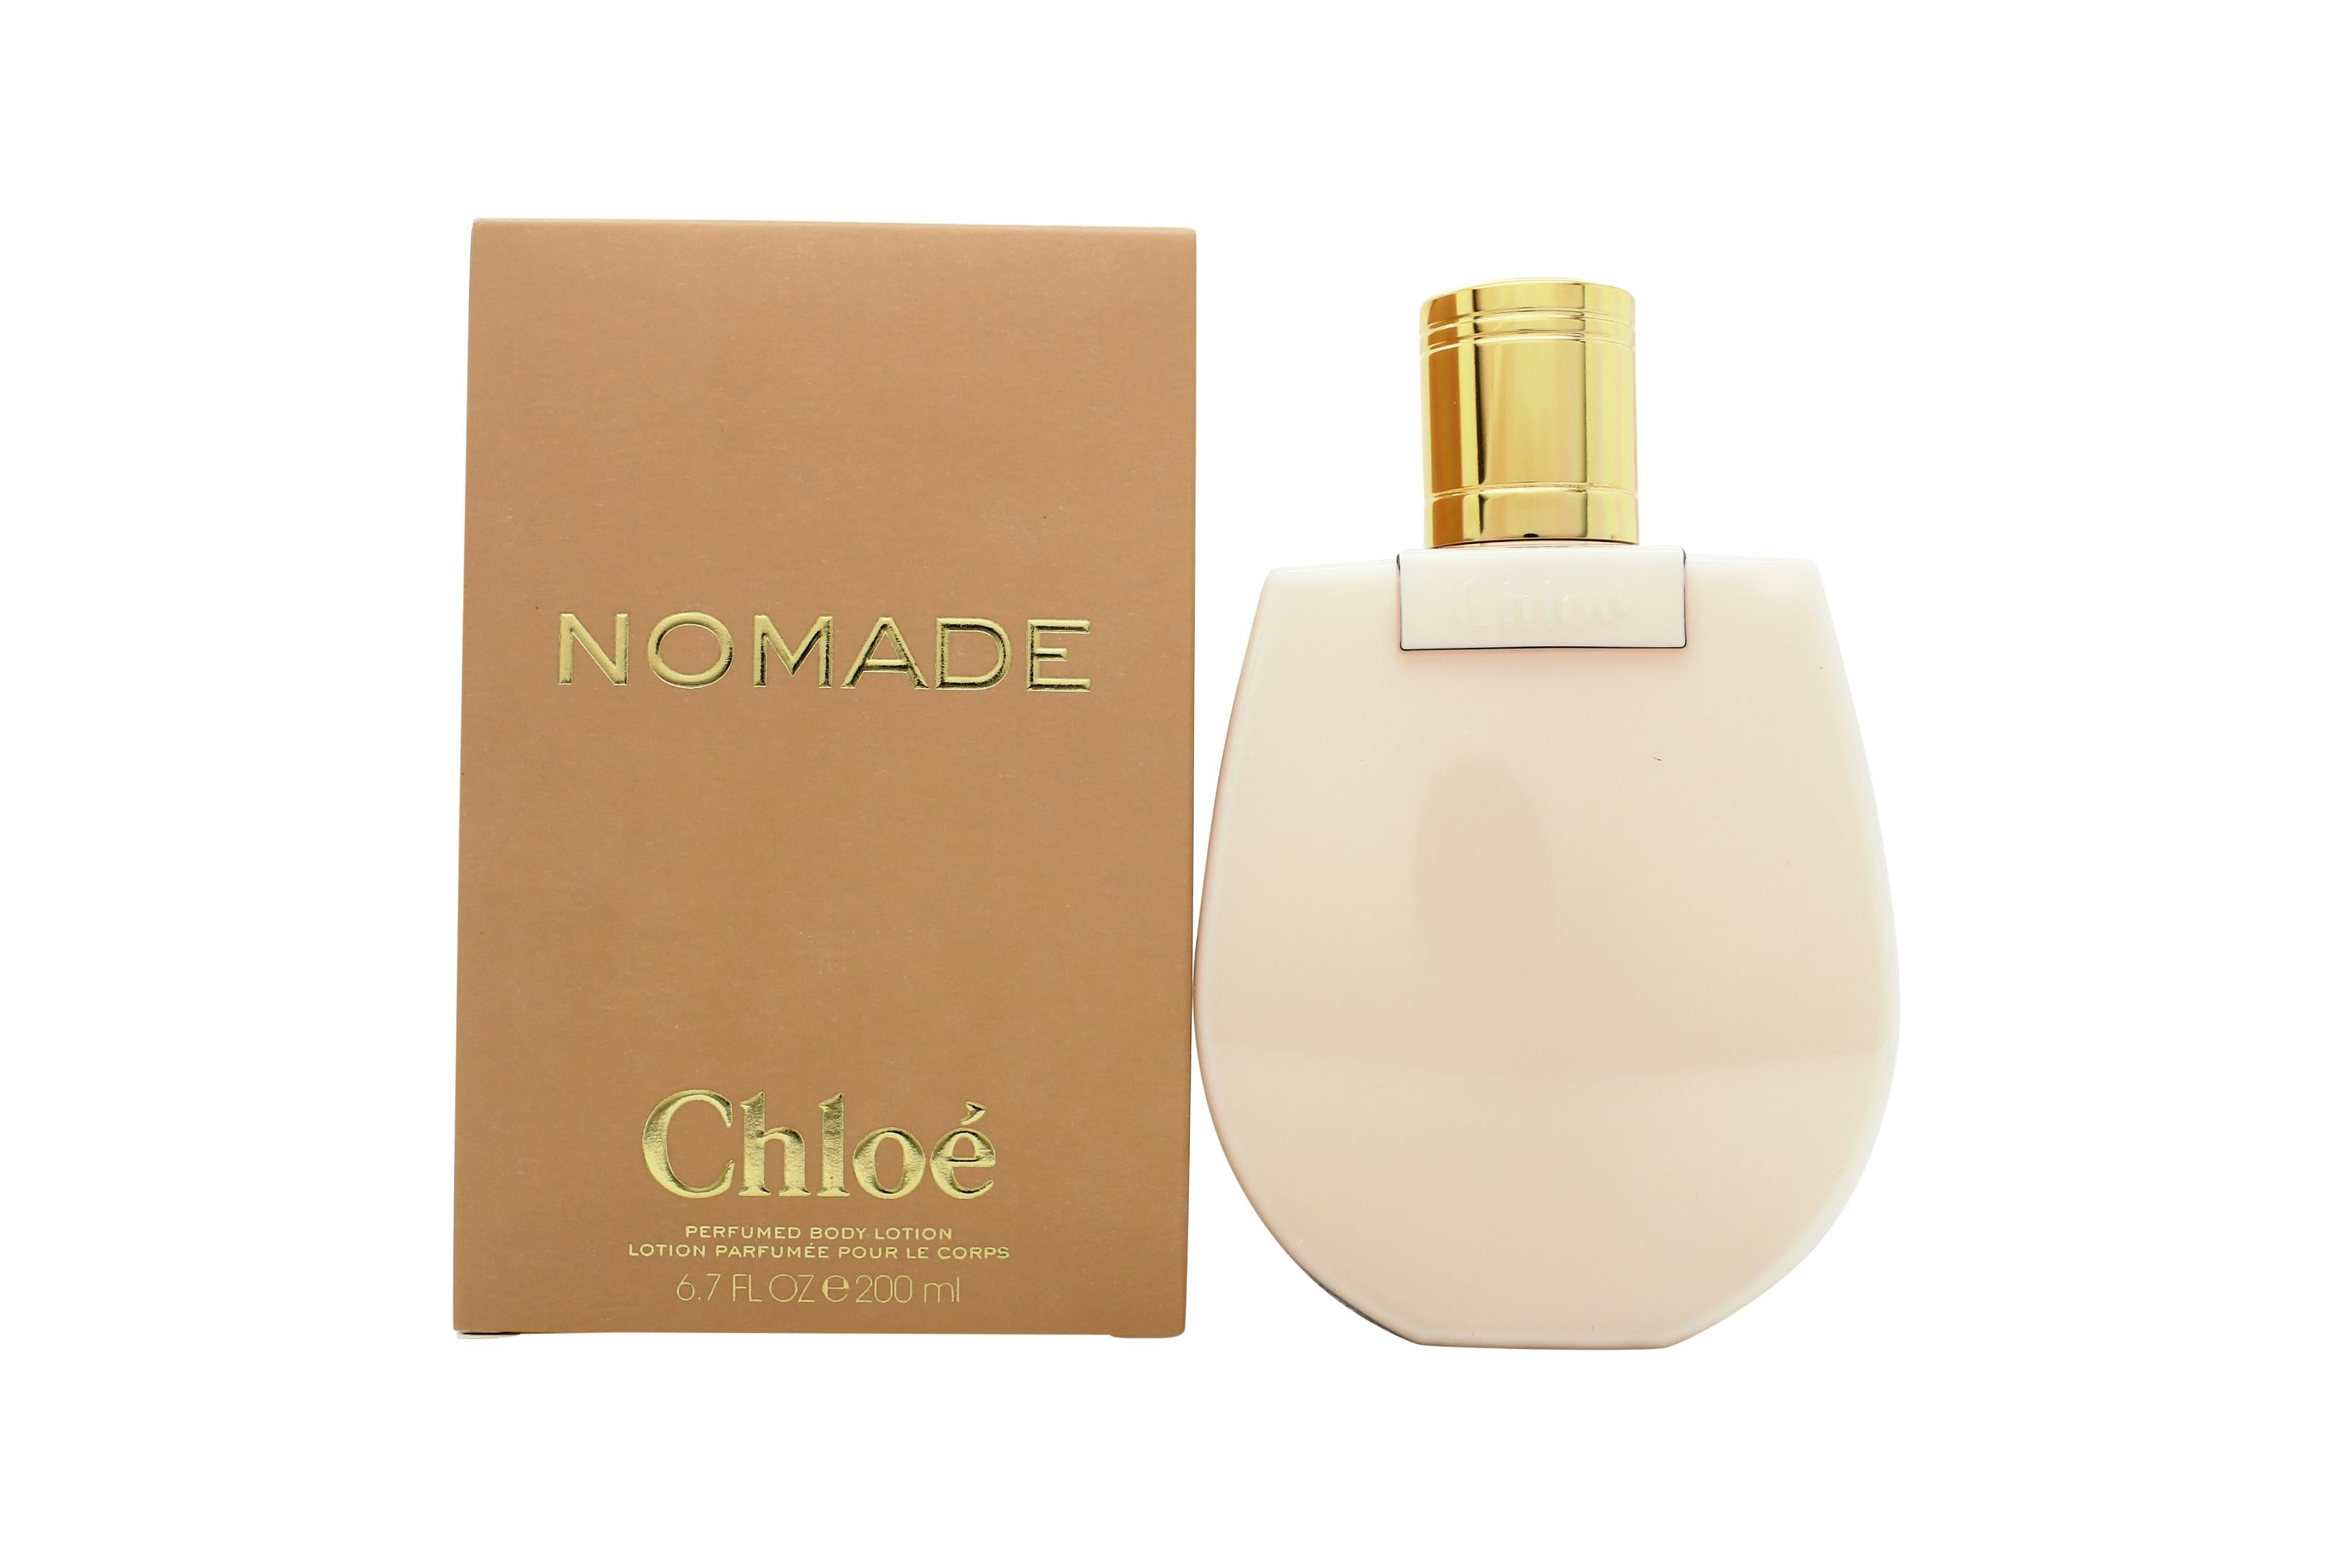 View Chloé Nomade Body Lotion 200ml information